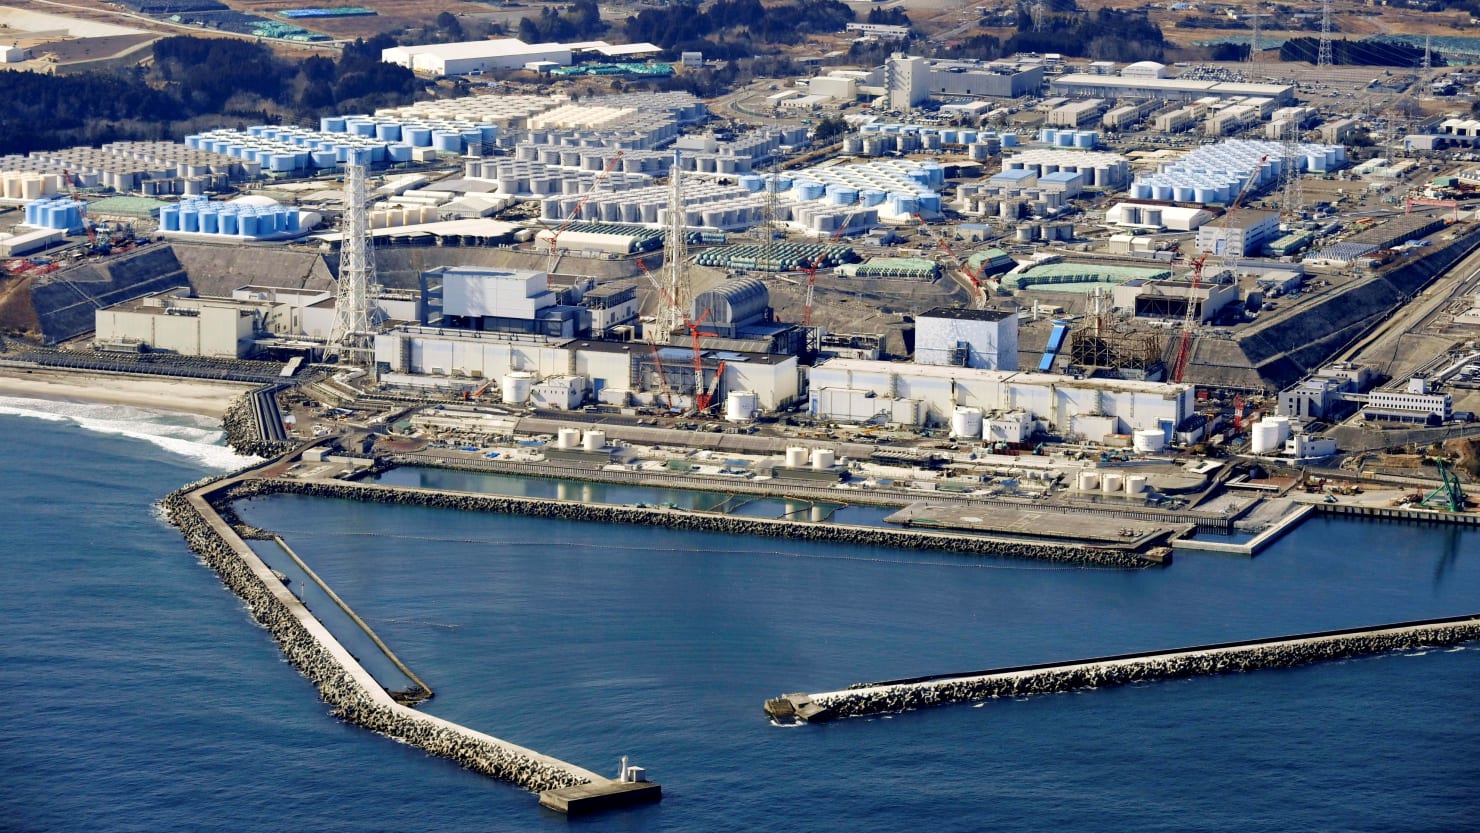 Japan says it is dumping a million tons of Fukushima wastewater into the sea